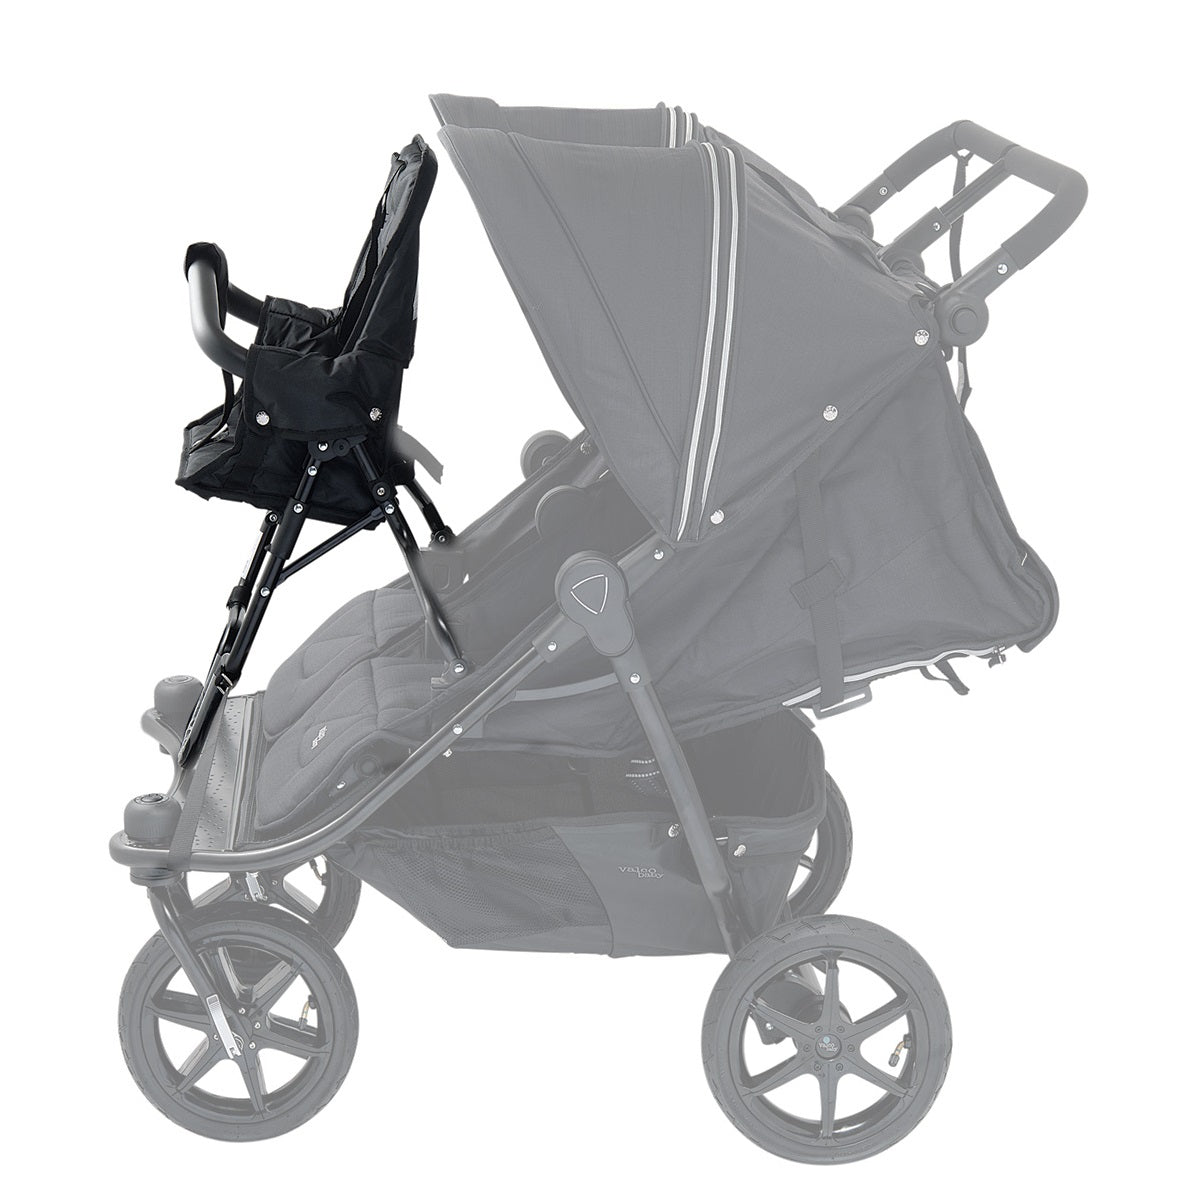 valco baby stroller with joey seat